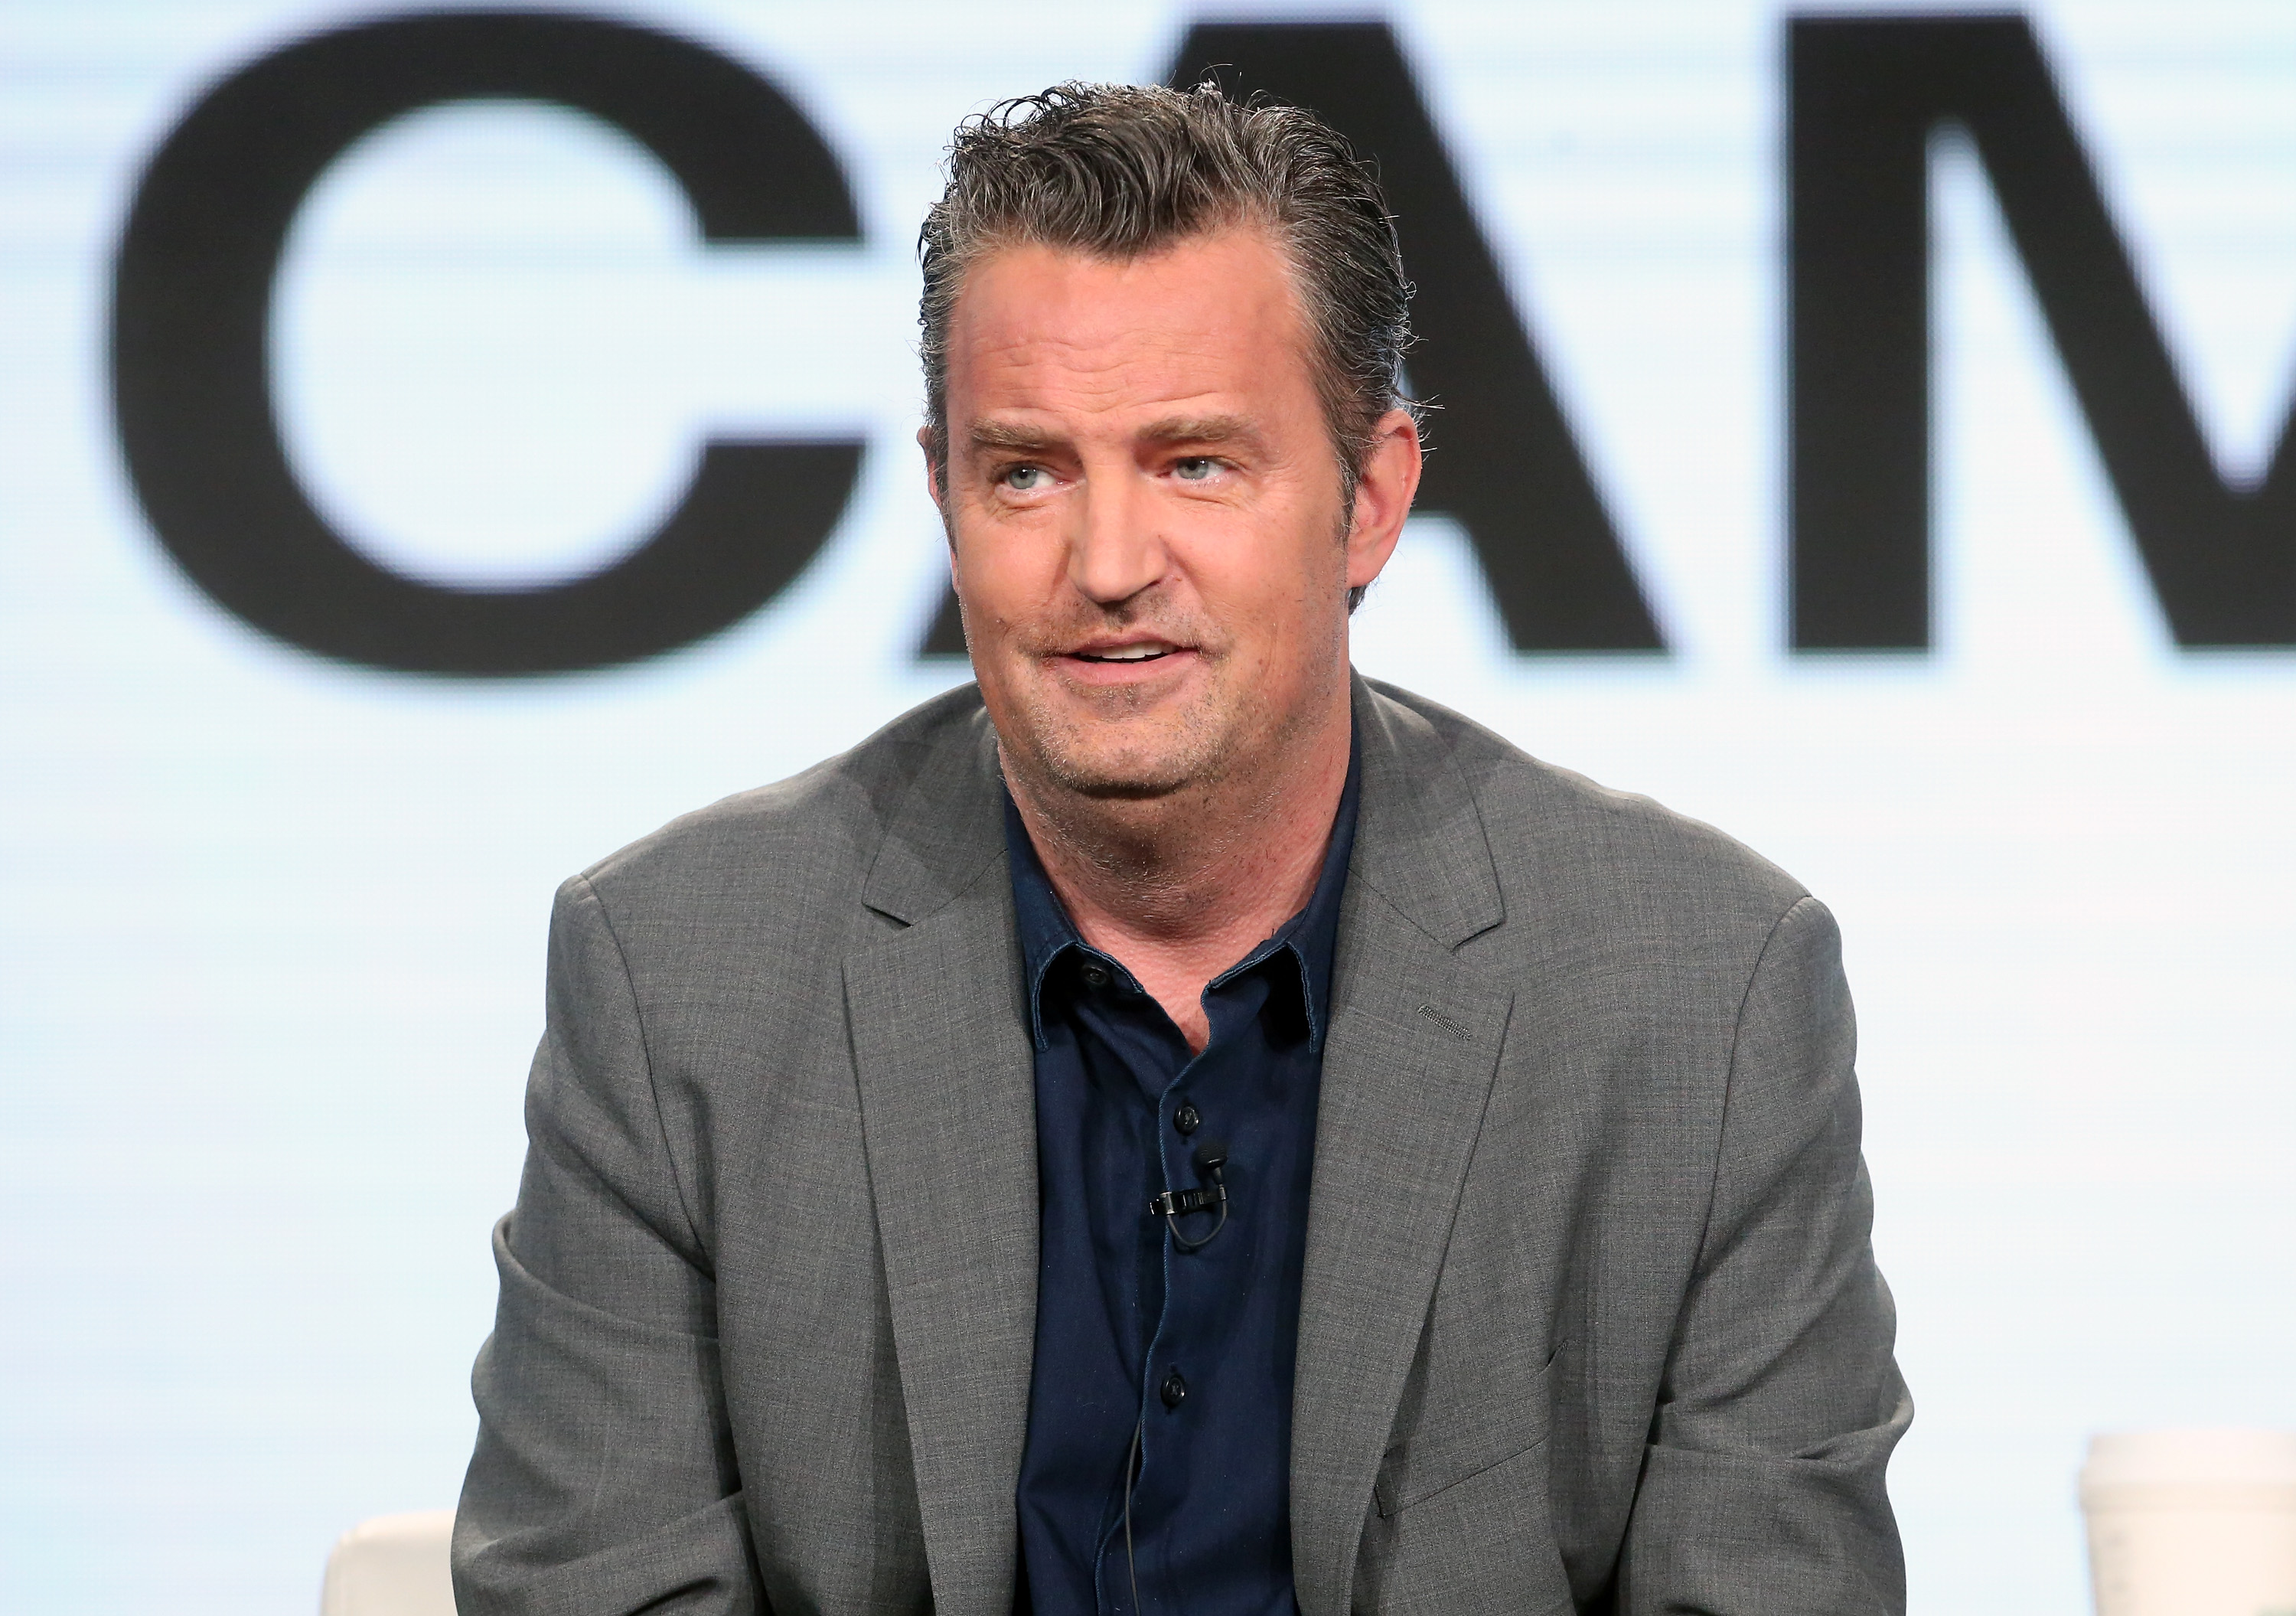 Matthew Perry on January 13, 2017 in Pasadena, California. | Source: Getty Images